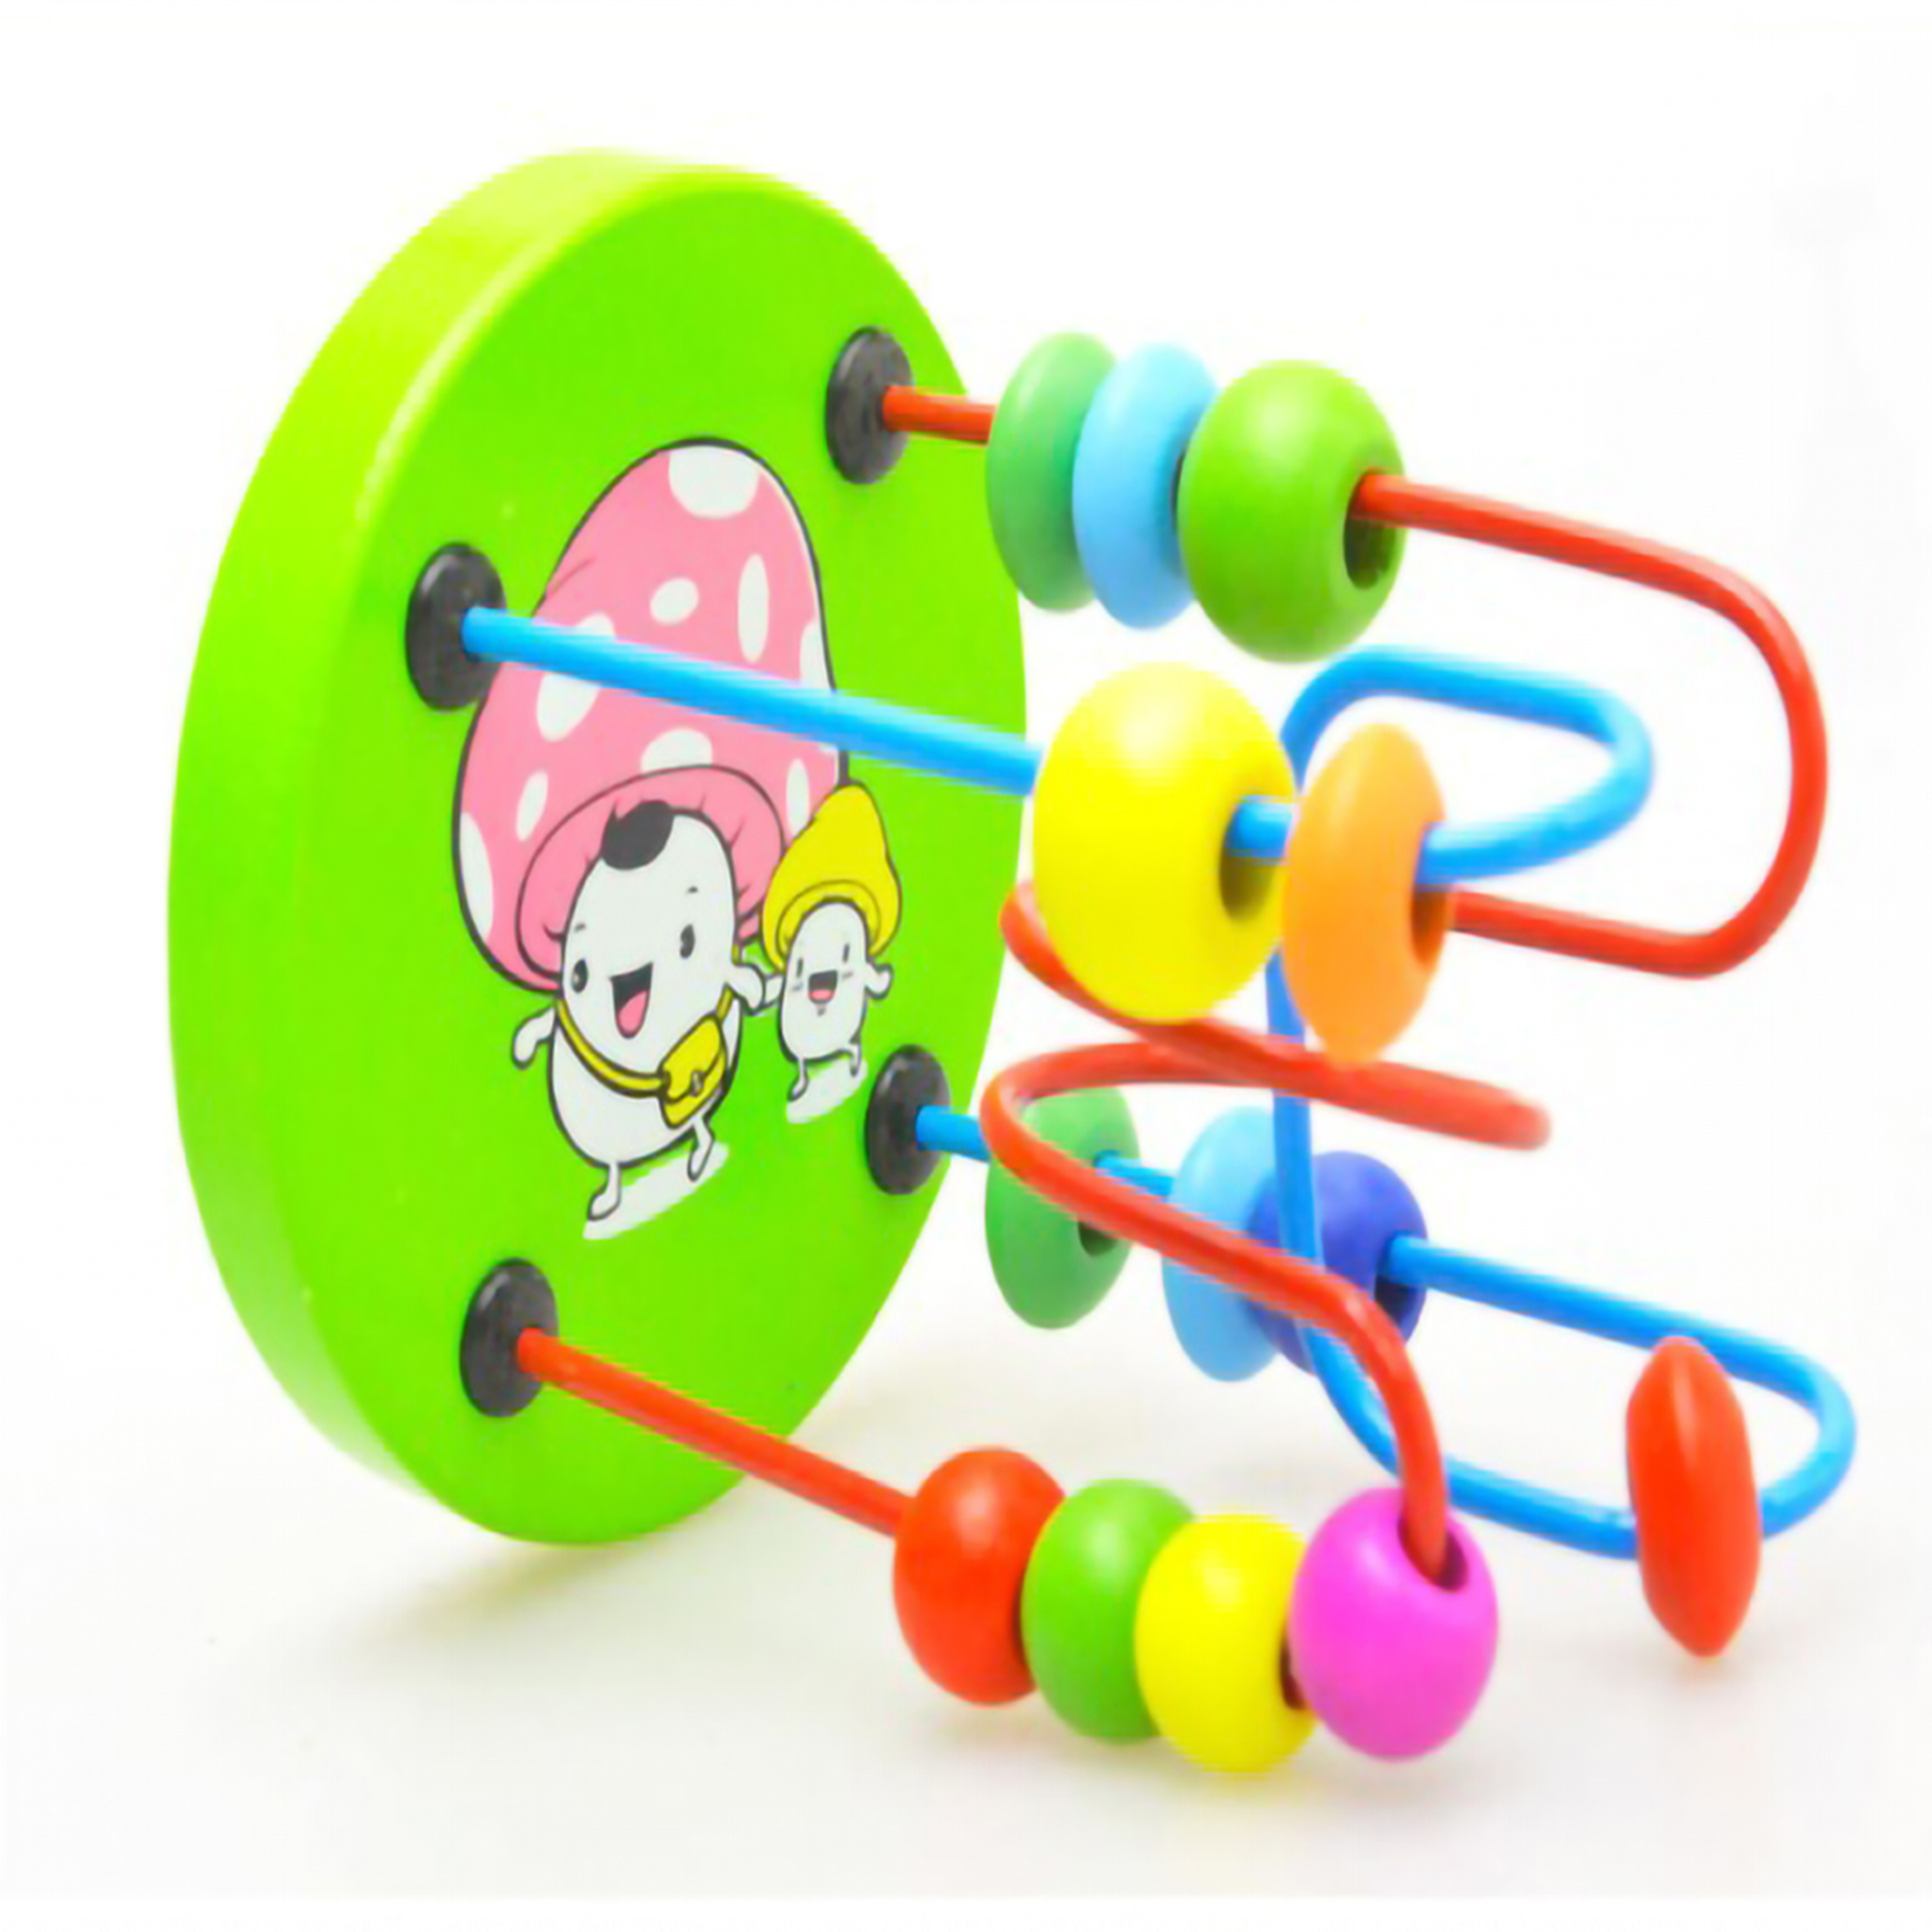 Wire Maze Roller Coaster for Toddlers Toy Gift Child Kids Colorful Wooden Mini Around Bead Educational Game Toy for Kids Sliding Beads On Twists Wire - image 3 of 6